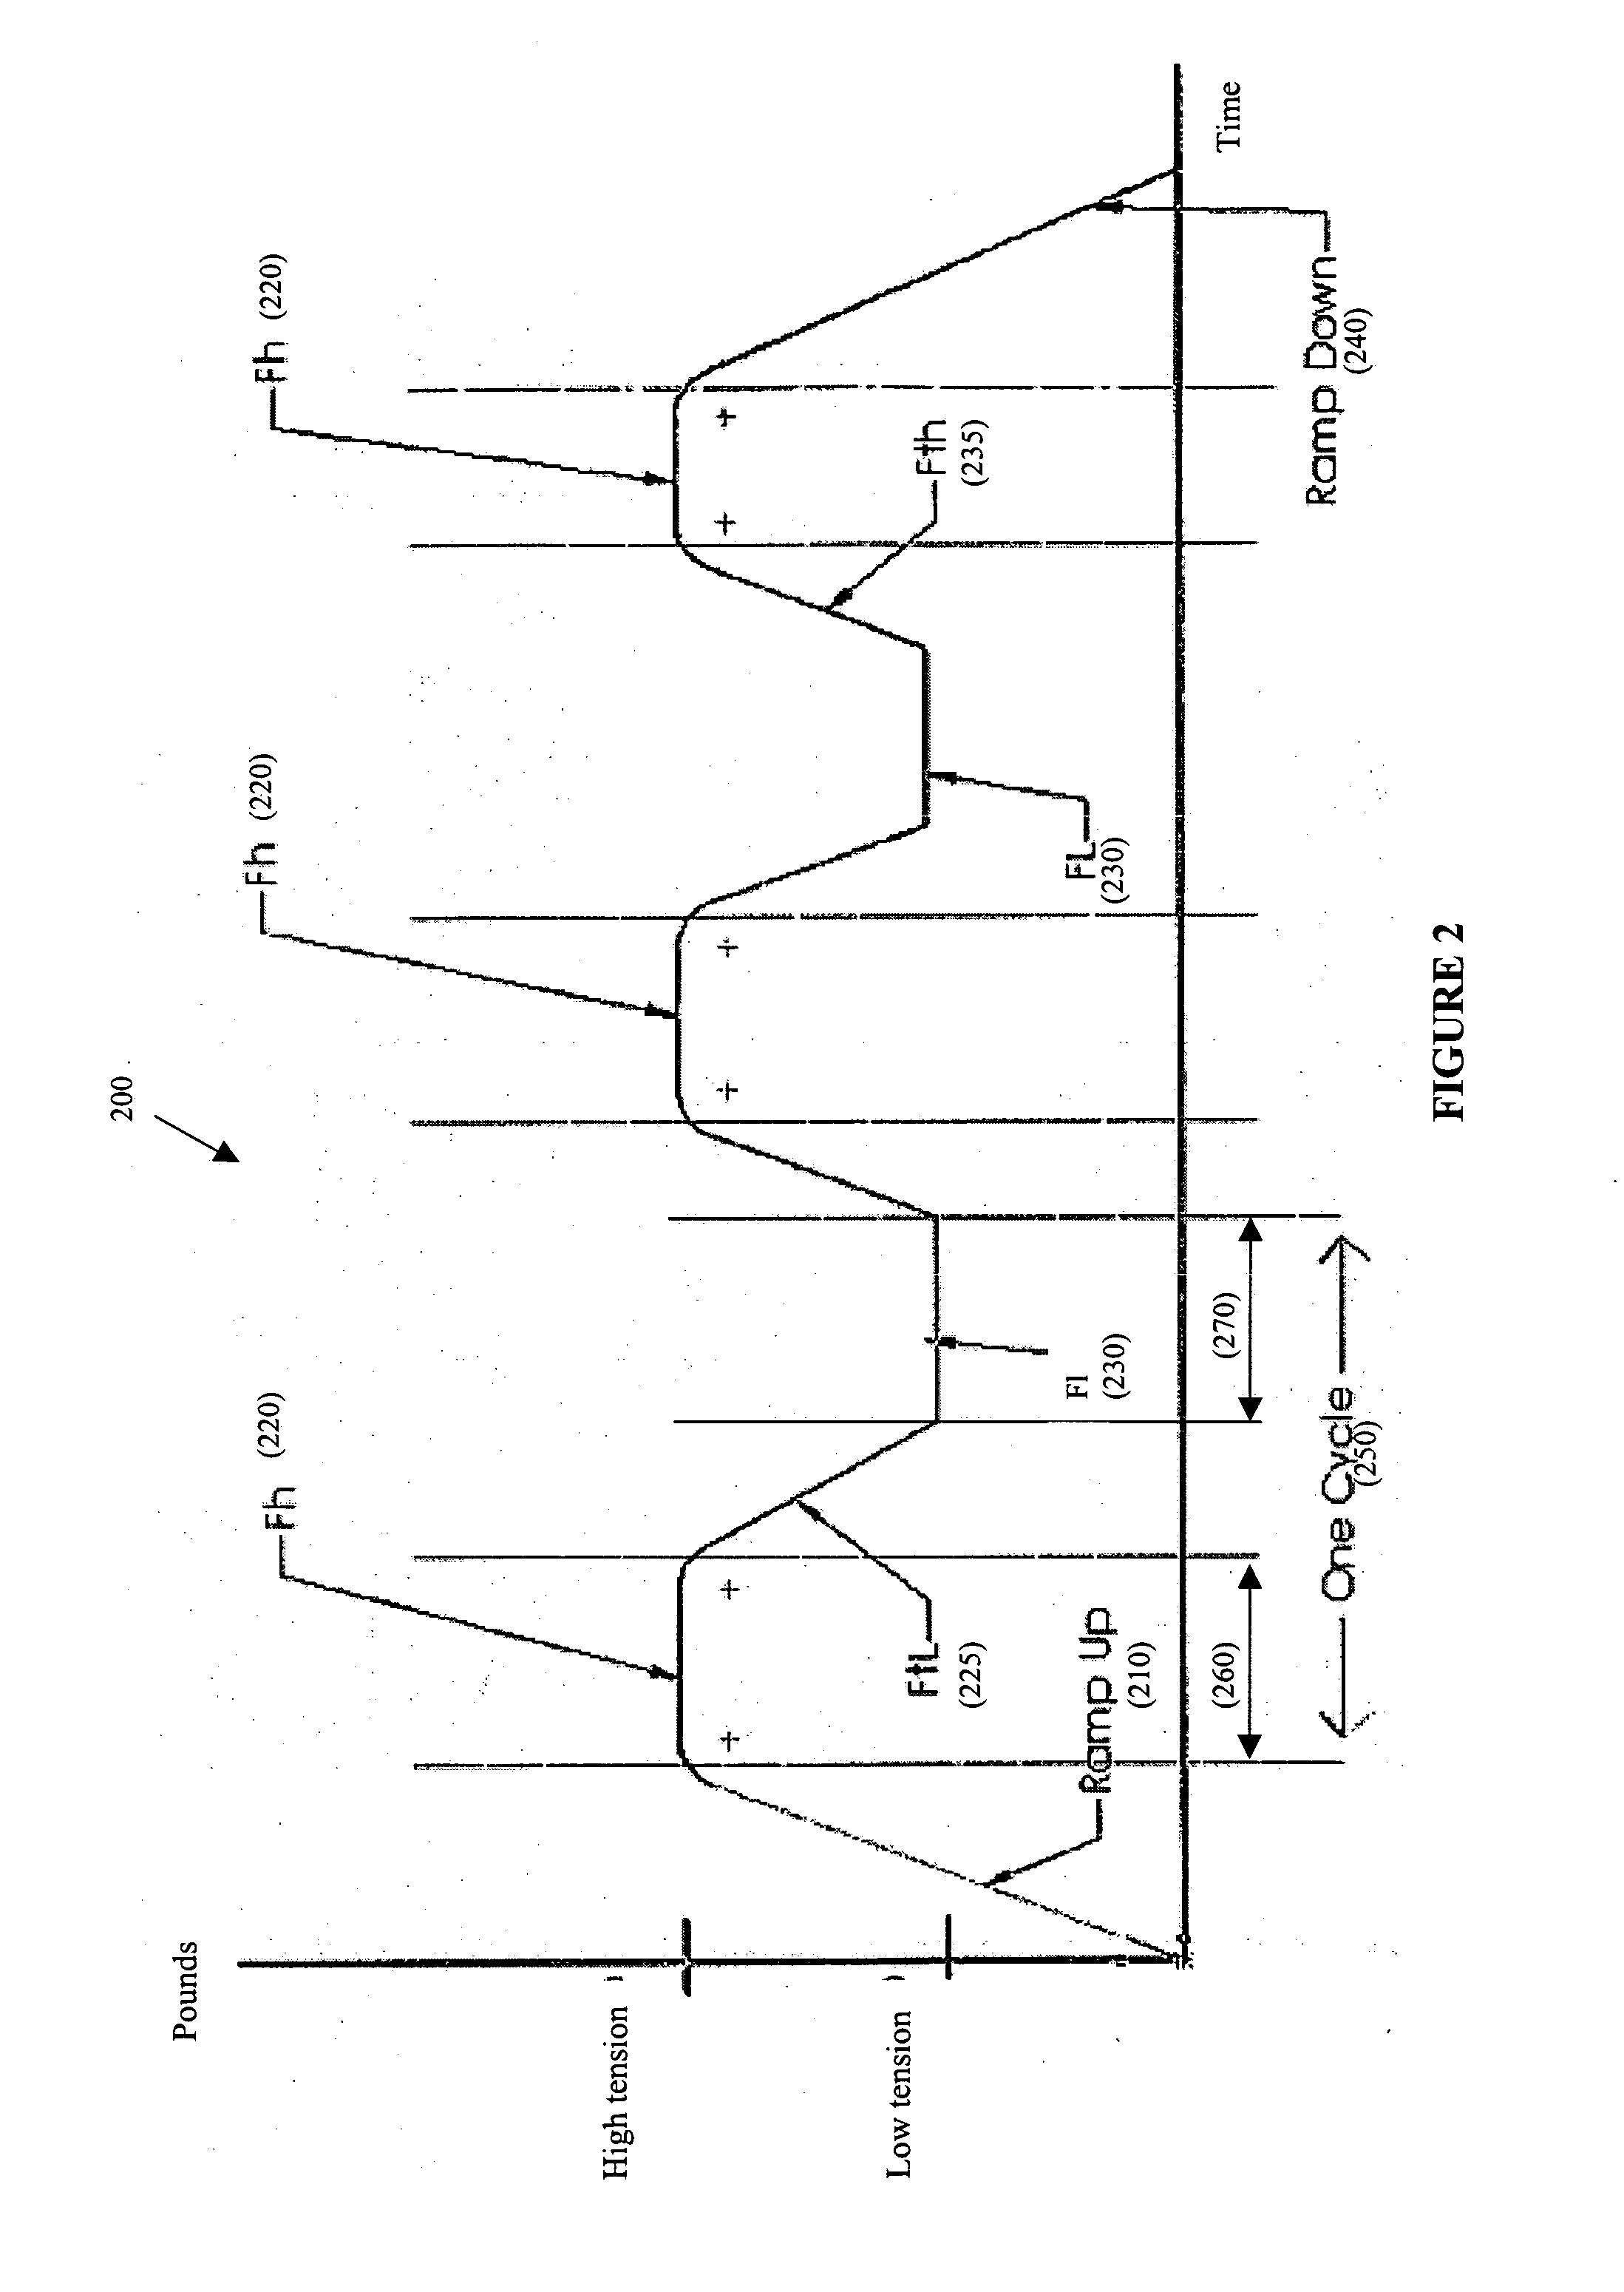 Spinal decompression therapy system and method